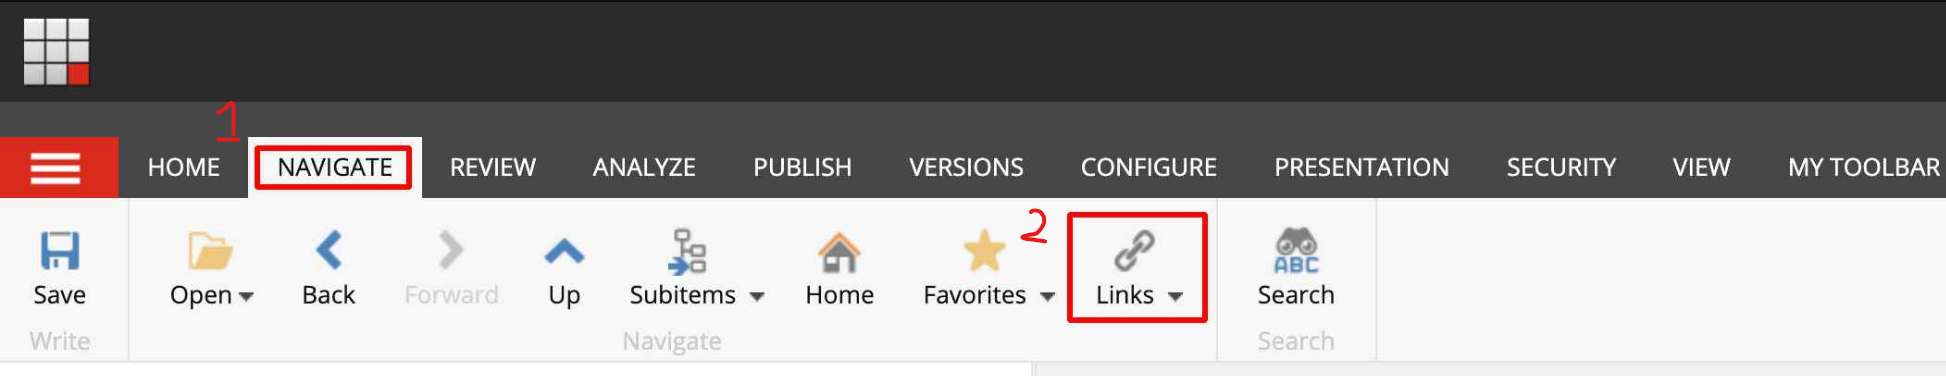 Links button in Sitecore Content Editor Navigate tab